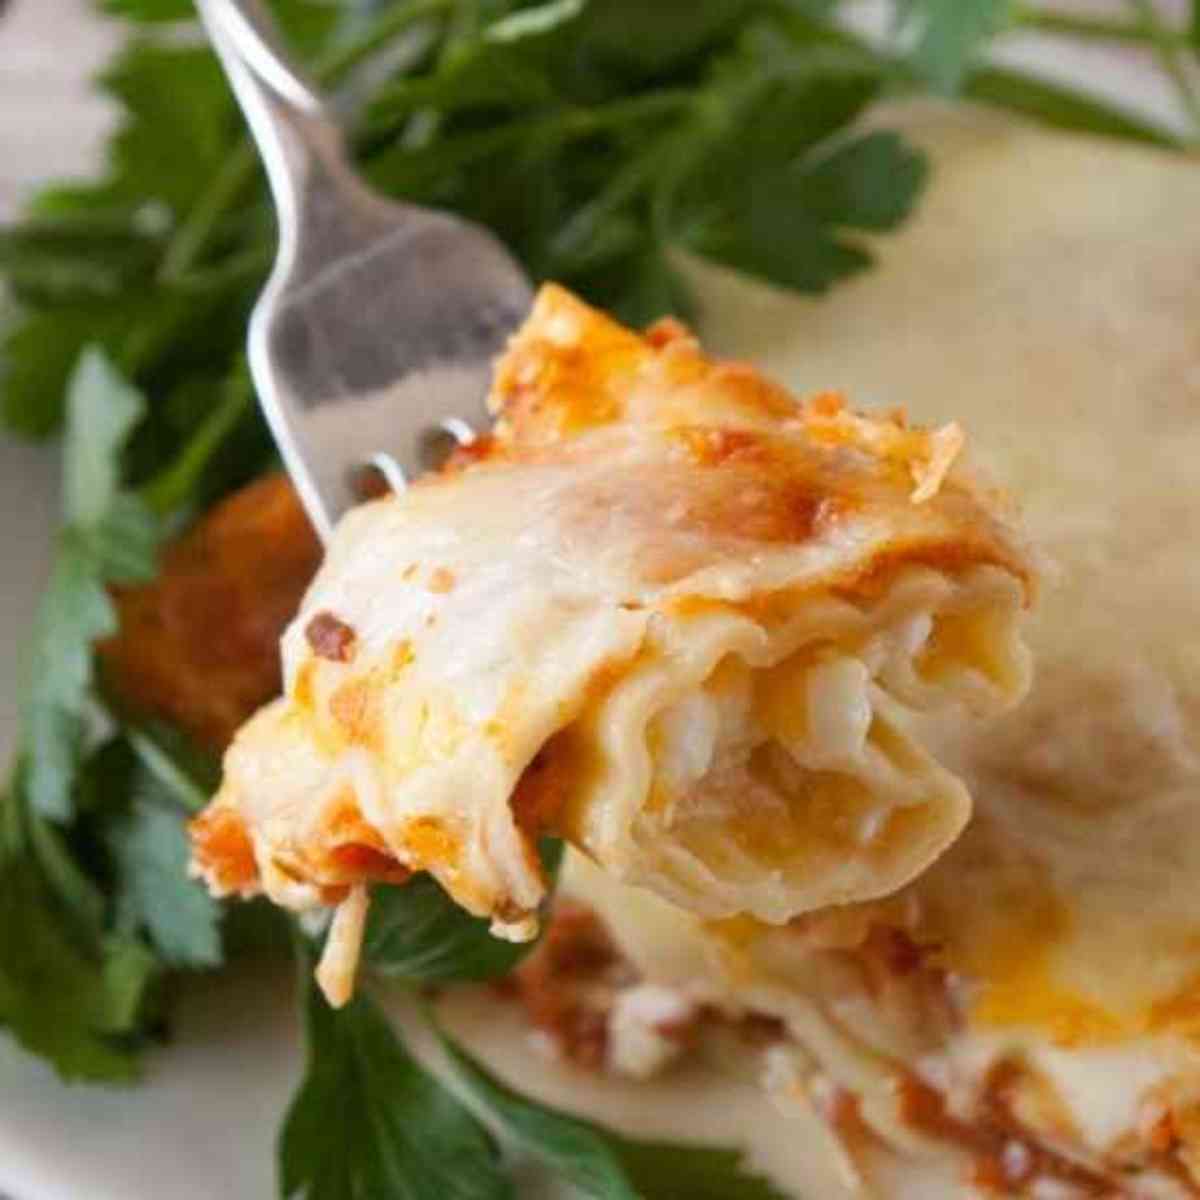 Big bite of cheese manicotti on the end of a fork!